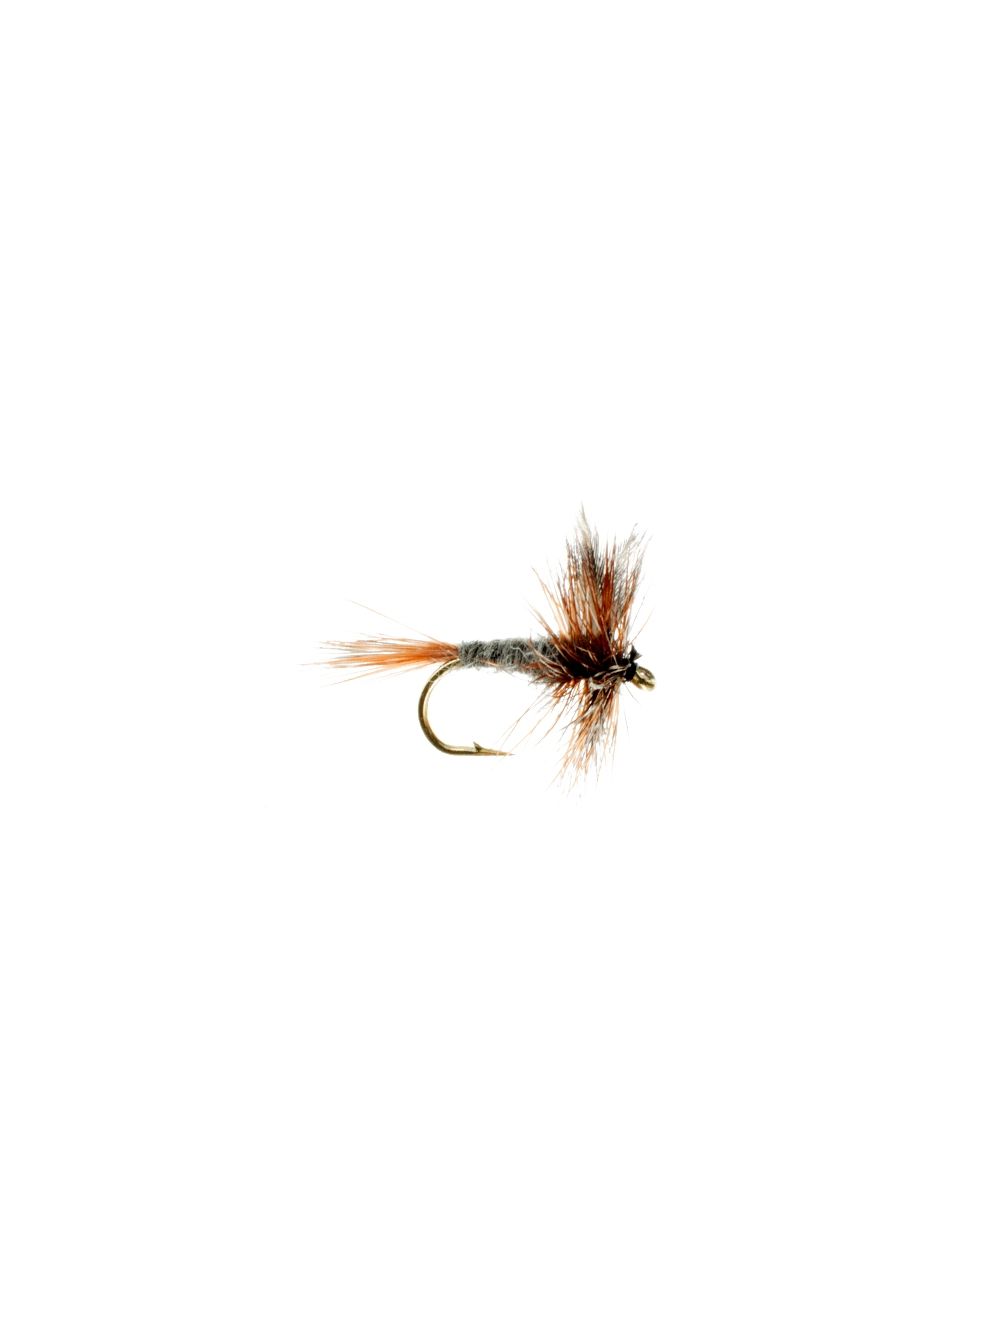 Make Them Rise - Dry Flies for Trout - Fly Deal Flies